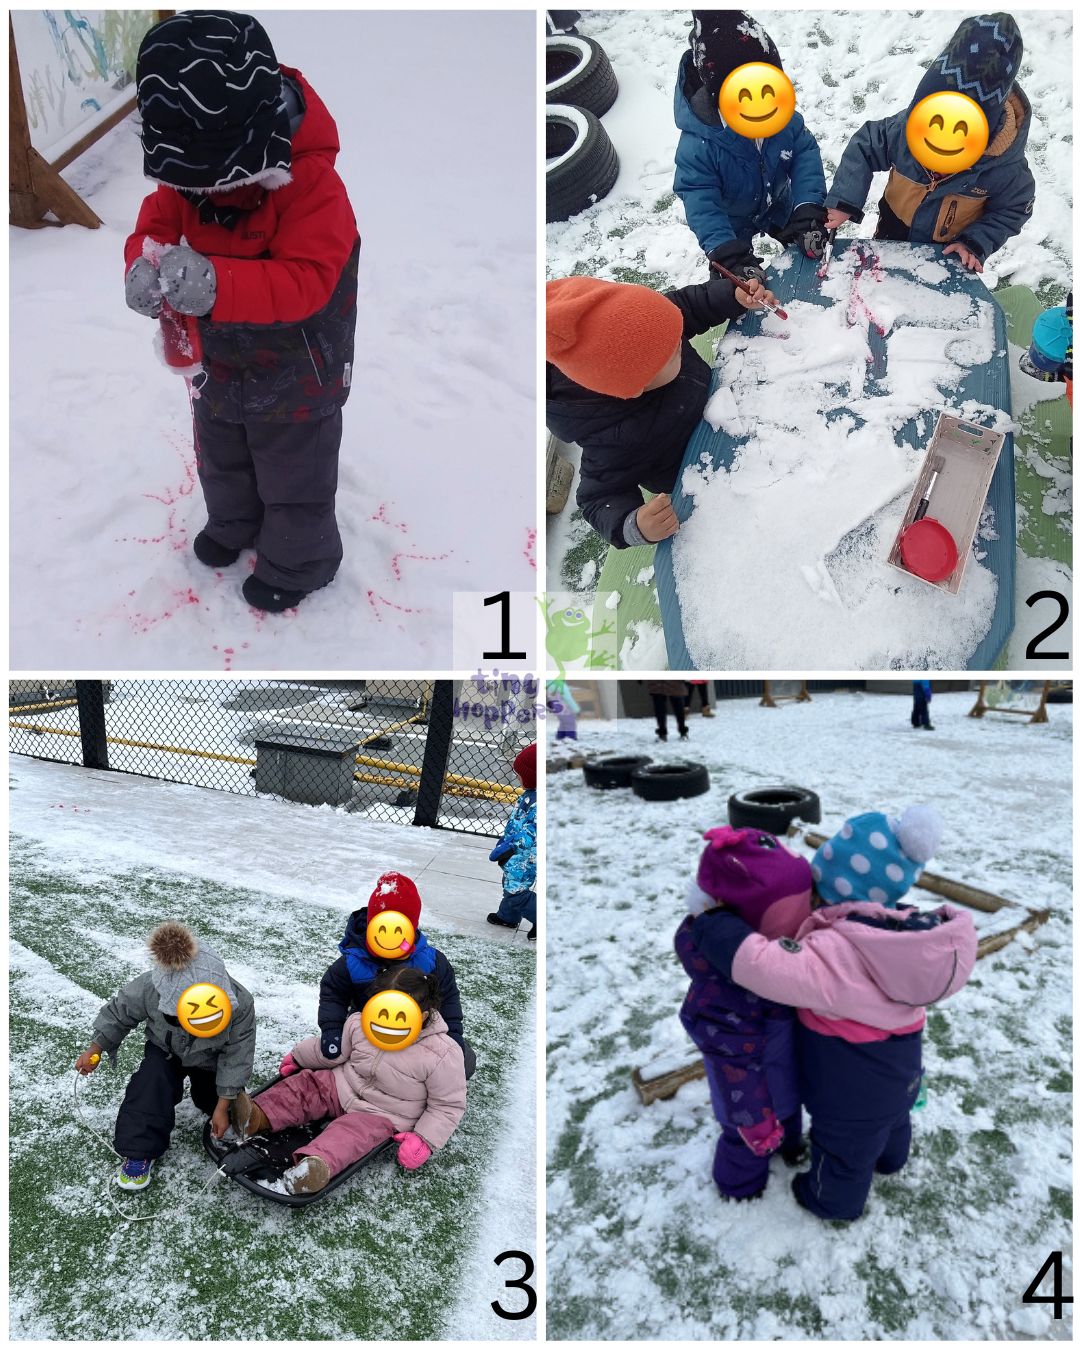 A college with 4 photos in which different scenarios of children playing in the snow can be seen.